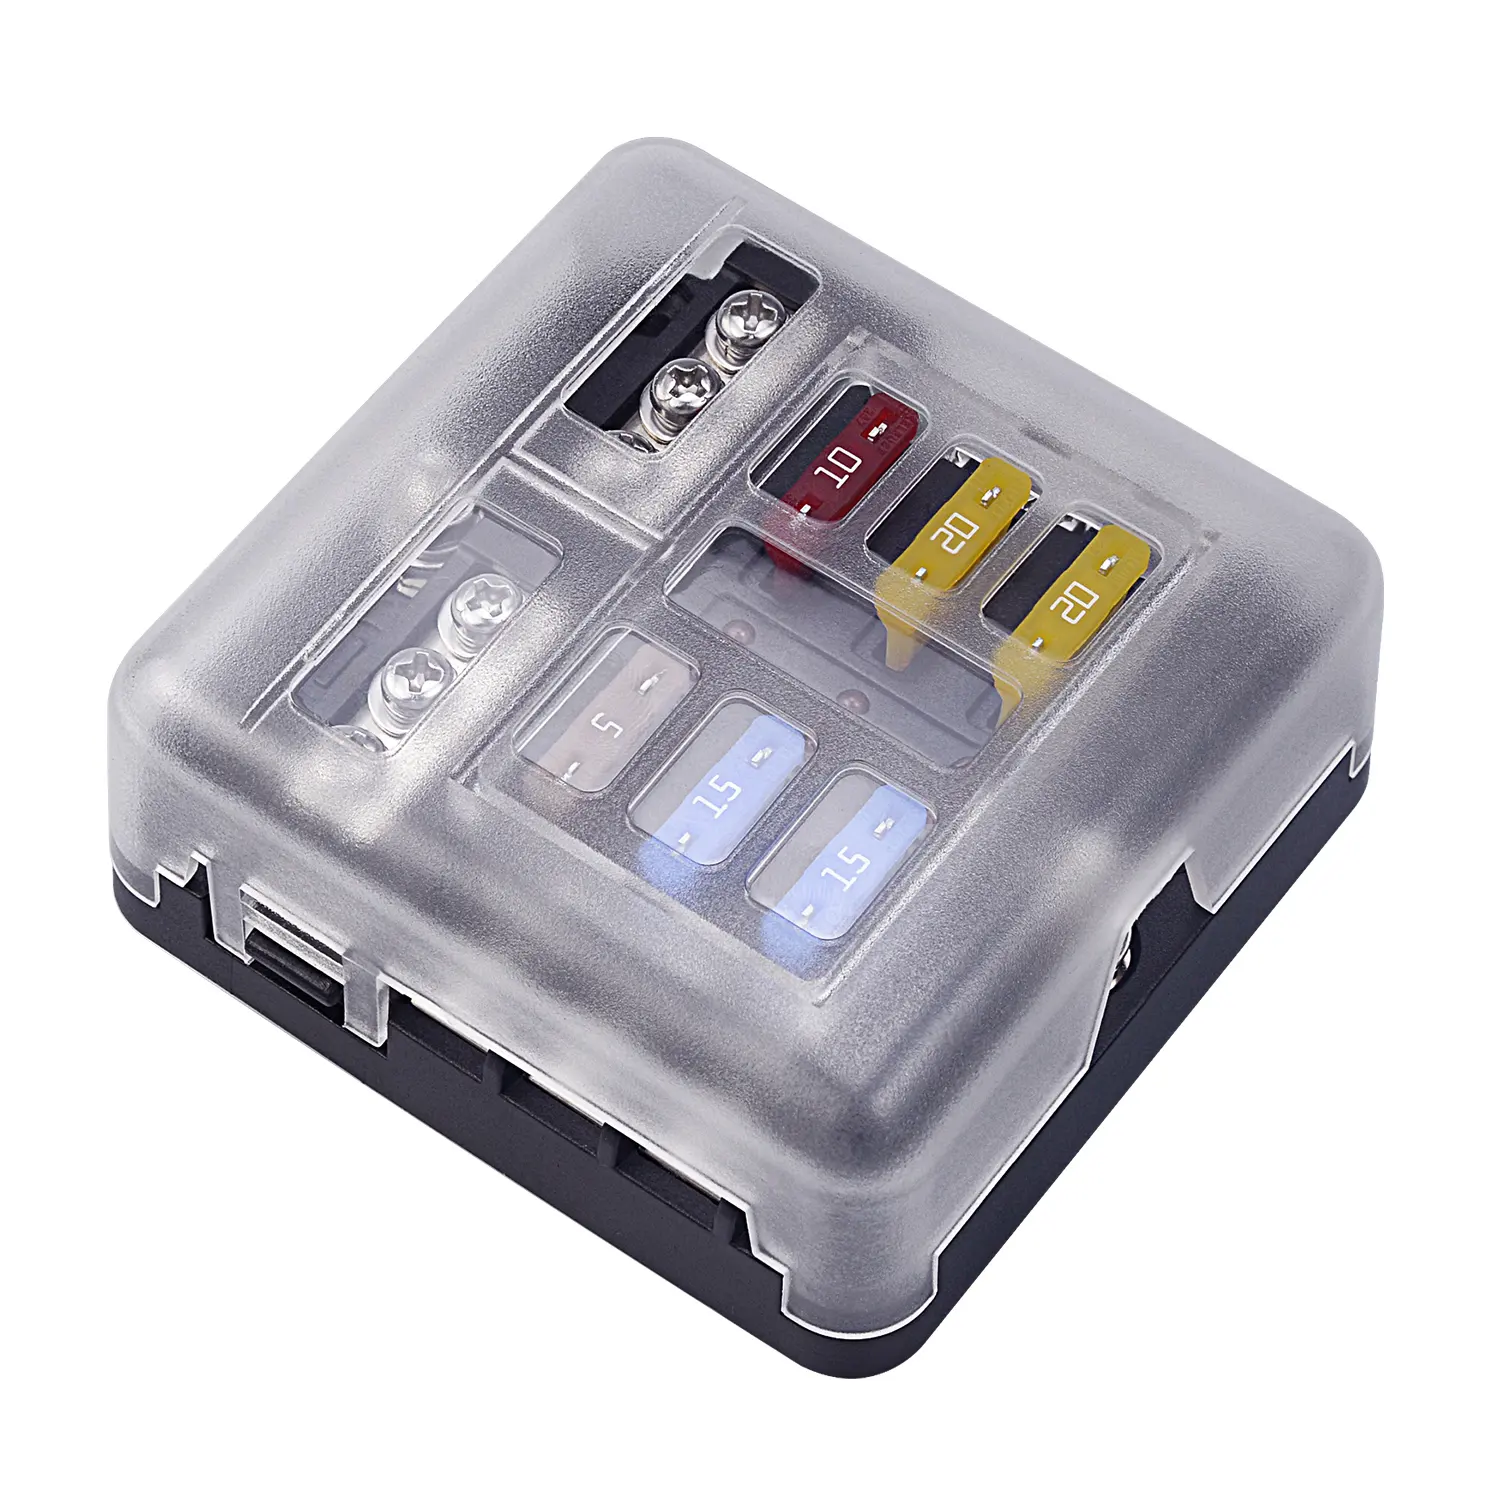 6 Way Car Fuse holder Independent positive and negative pole one in multiple out blade Fuse box with LED fuses kit